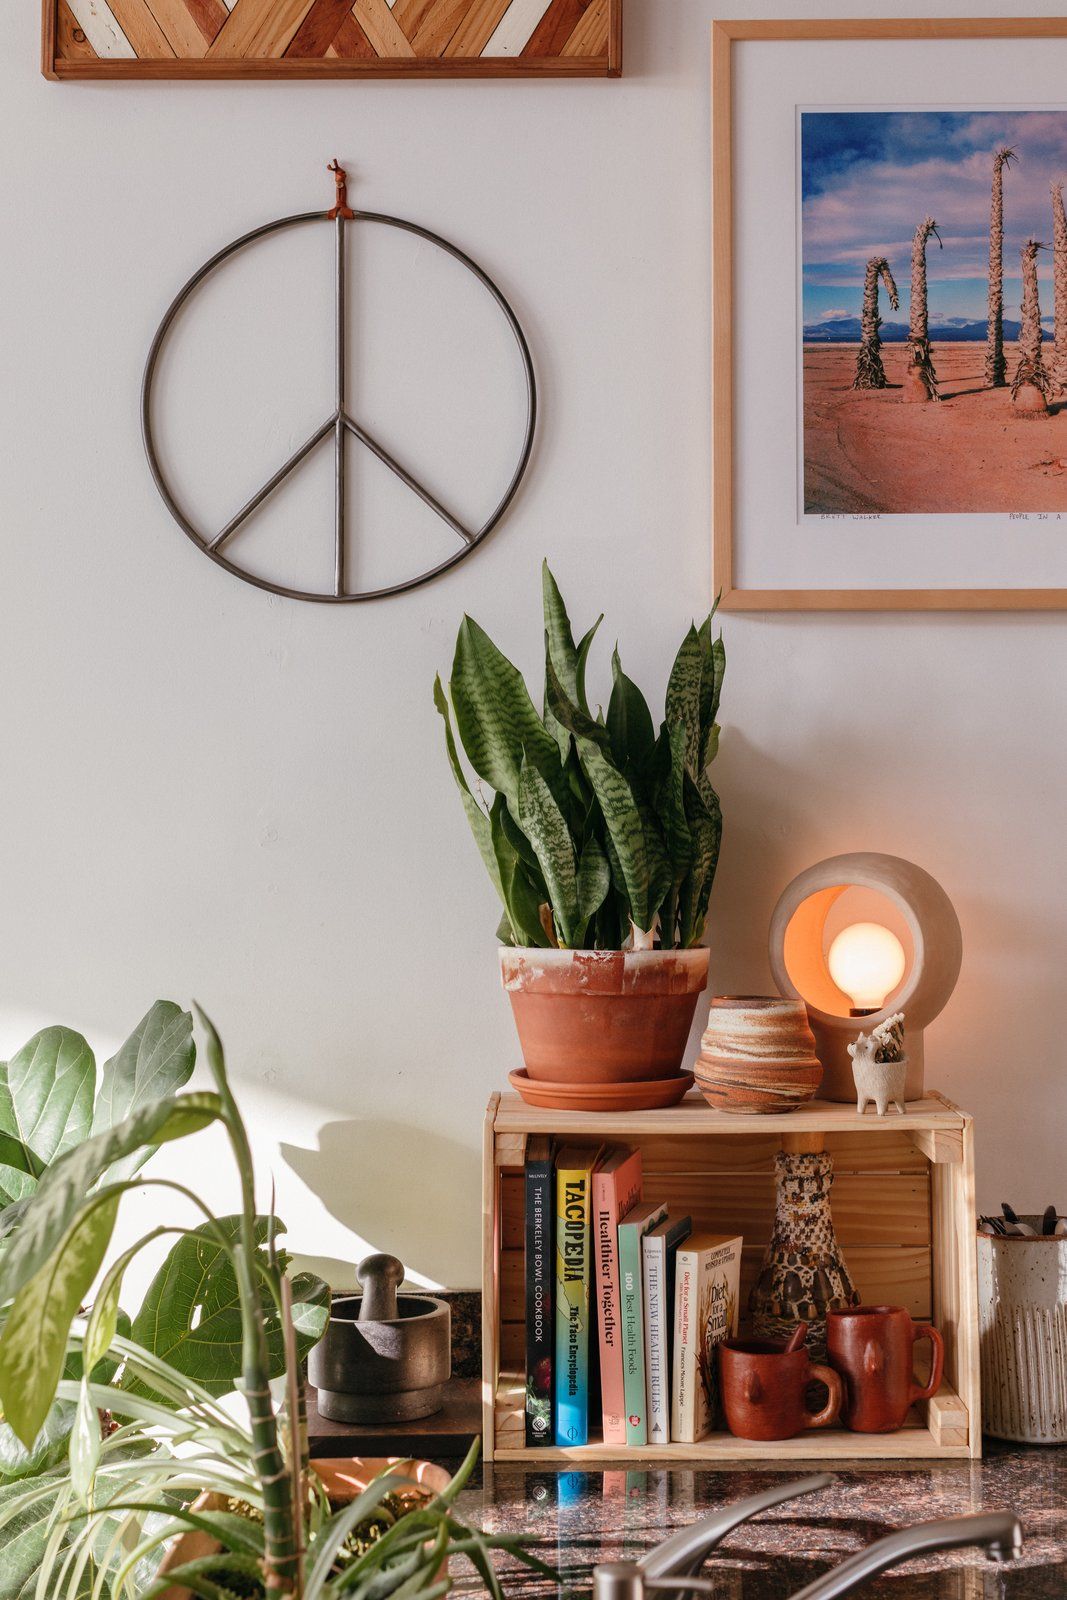 My House: An Creative Couple’s Live/Work Loft Is Full of Sunny, Southwestern Vibes